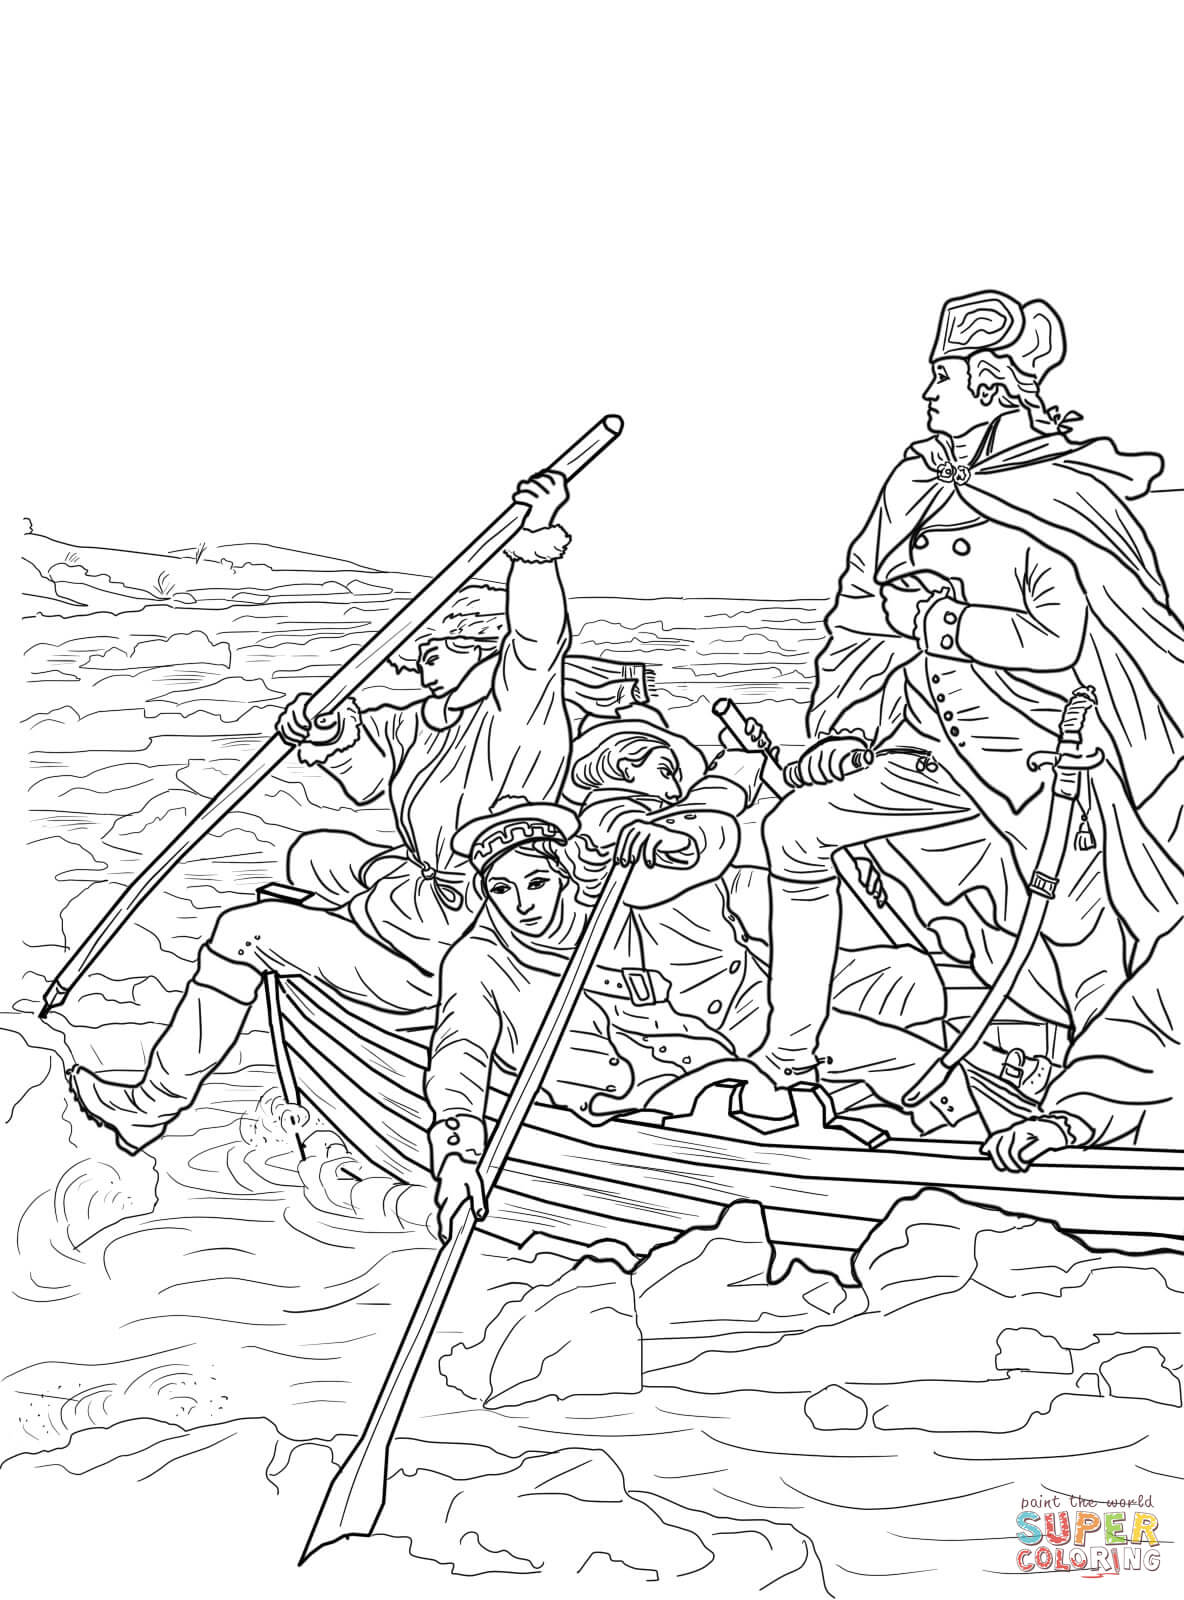 drawing of the boston tea party - Clip Art Library